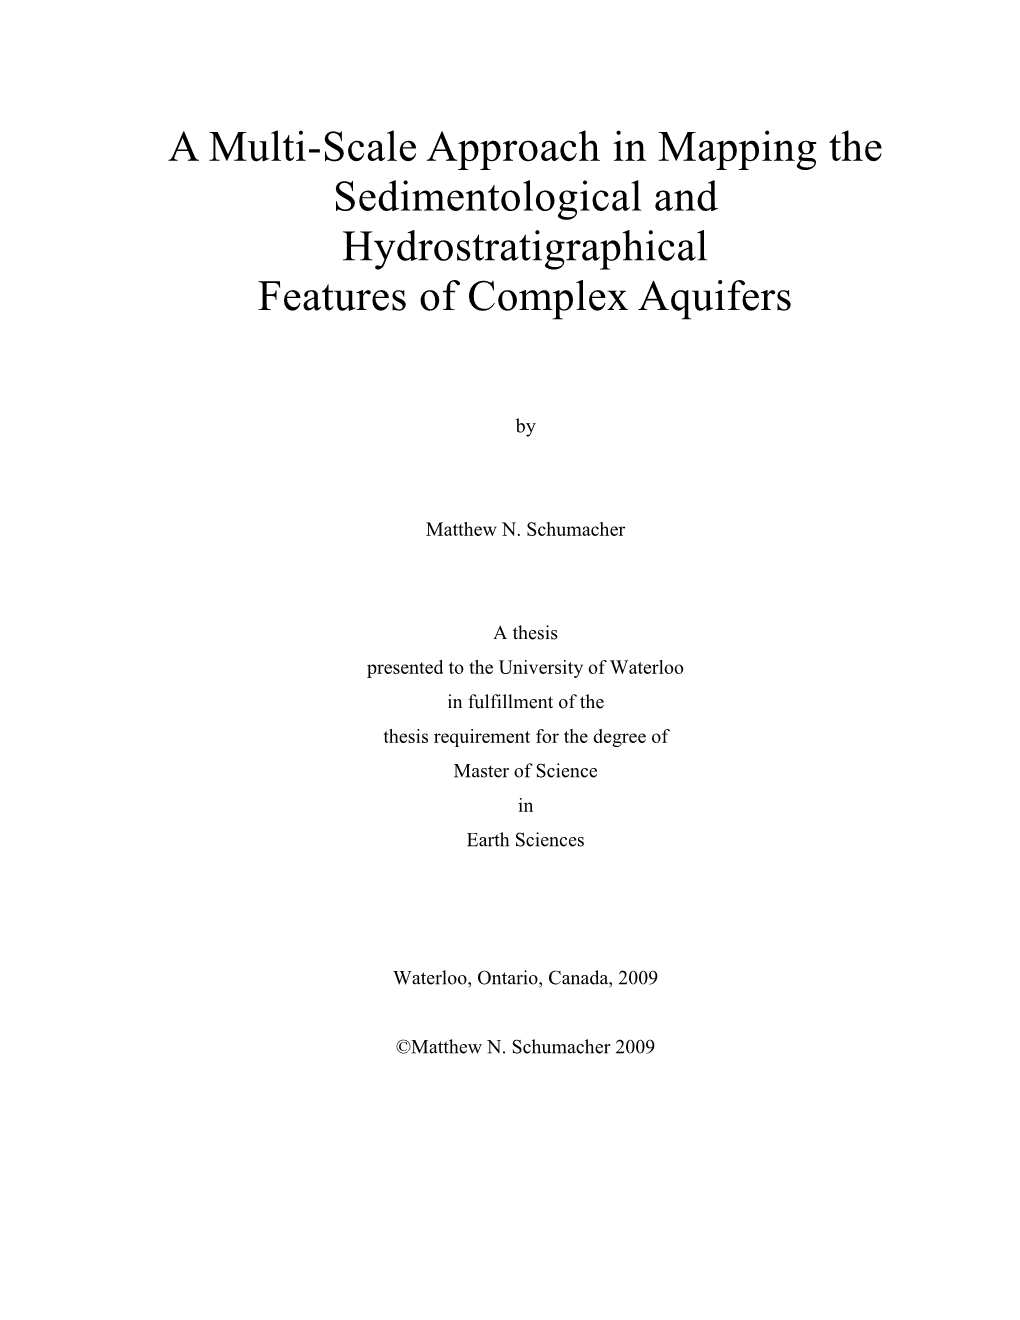 A Multi-Scale Approach in Mapping the Sedimentological and Hydrostratigraphical Features of Complex Aquifers